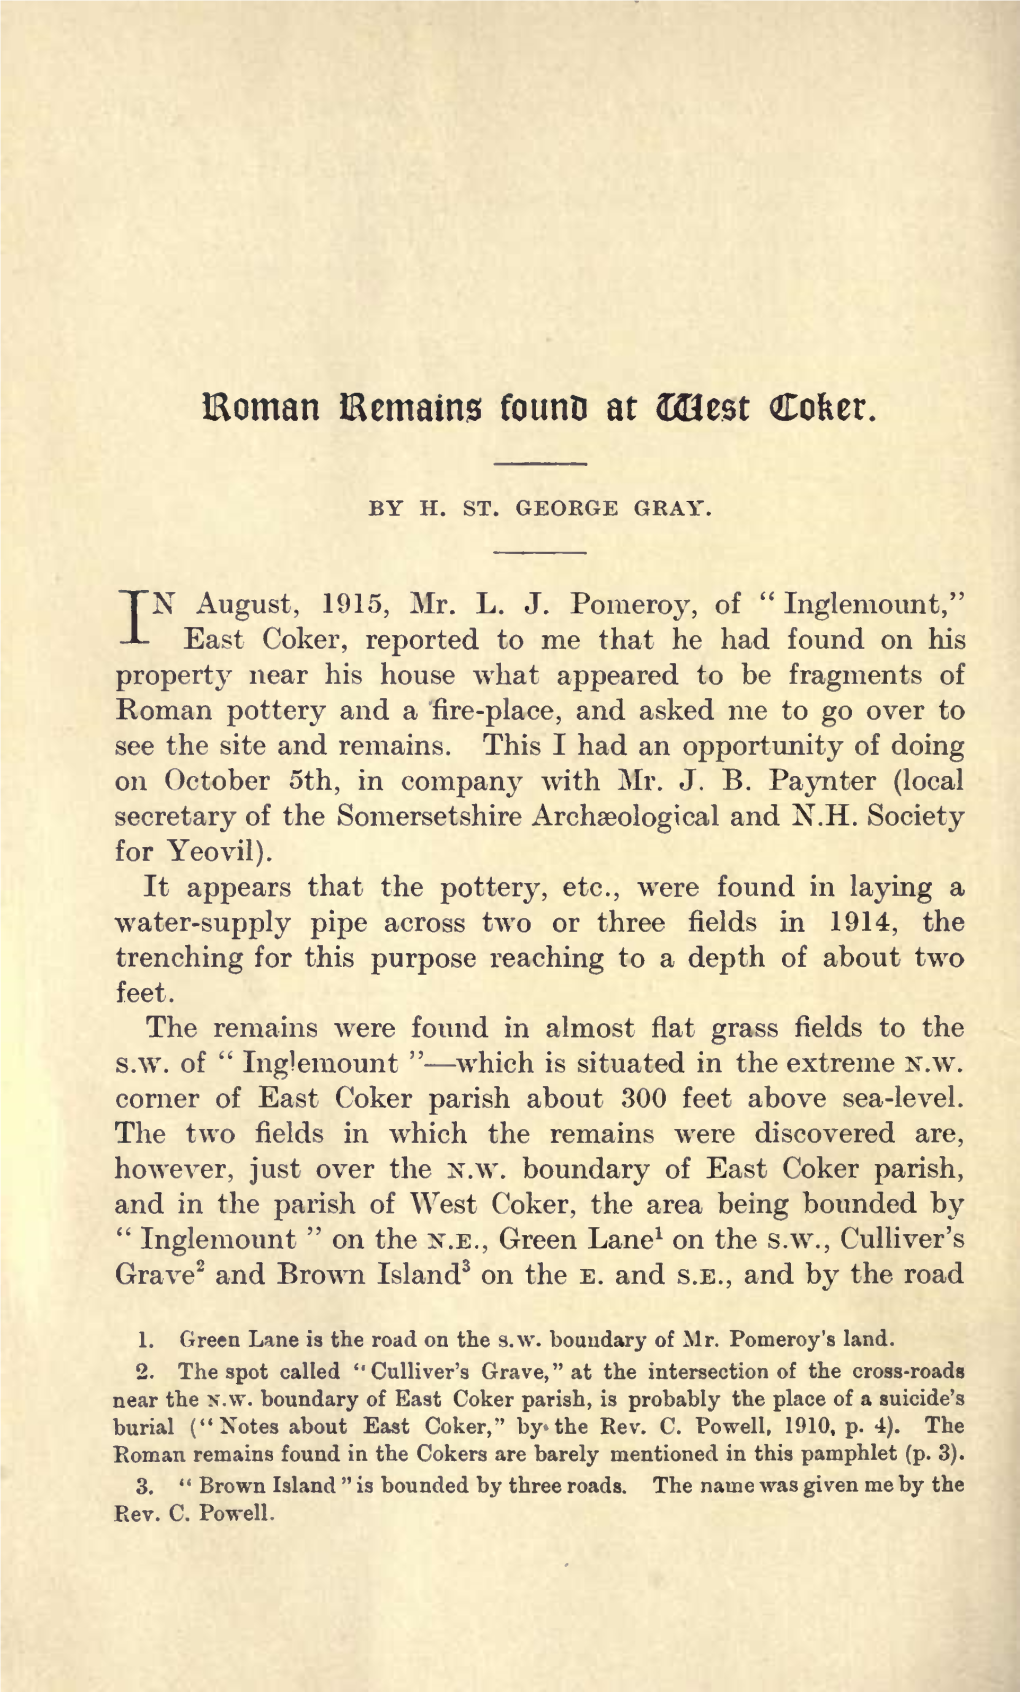 St. George Gray, Roman Remains Found at West Coker, Part II, Volume